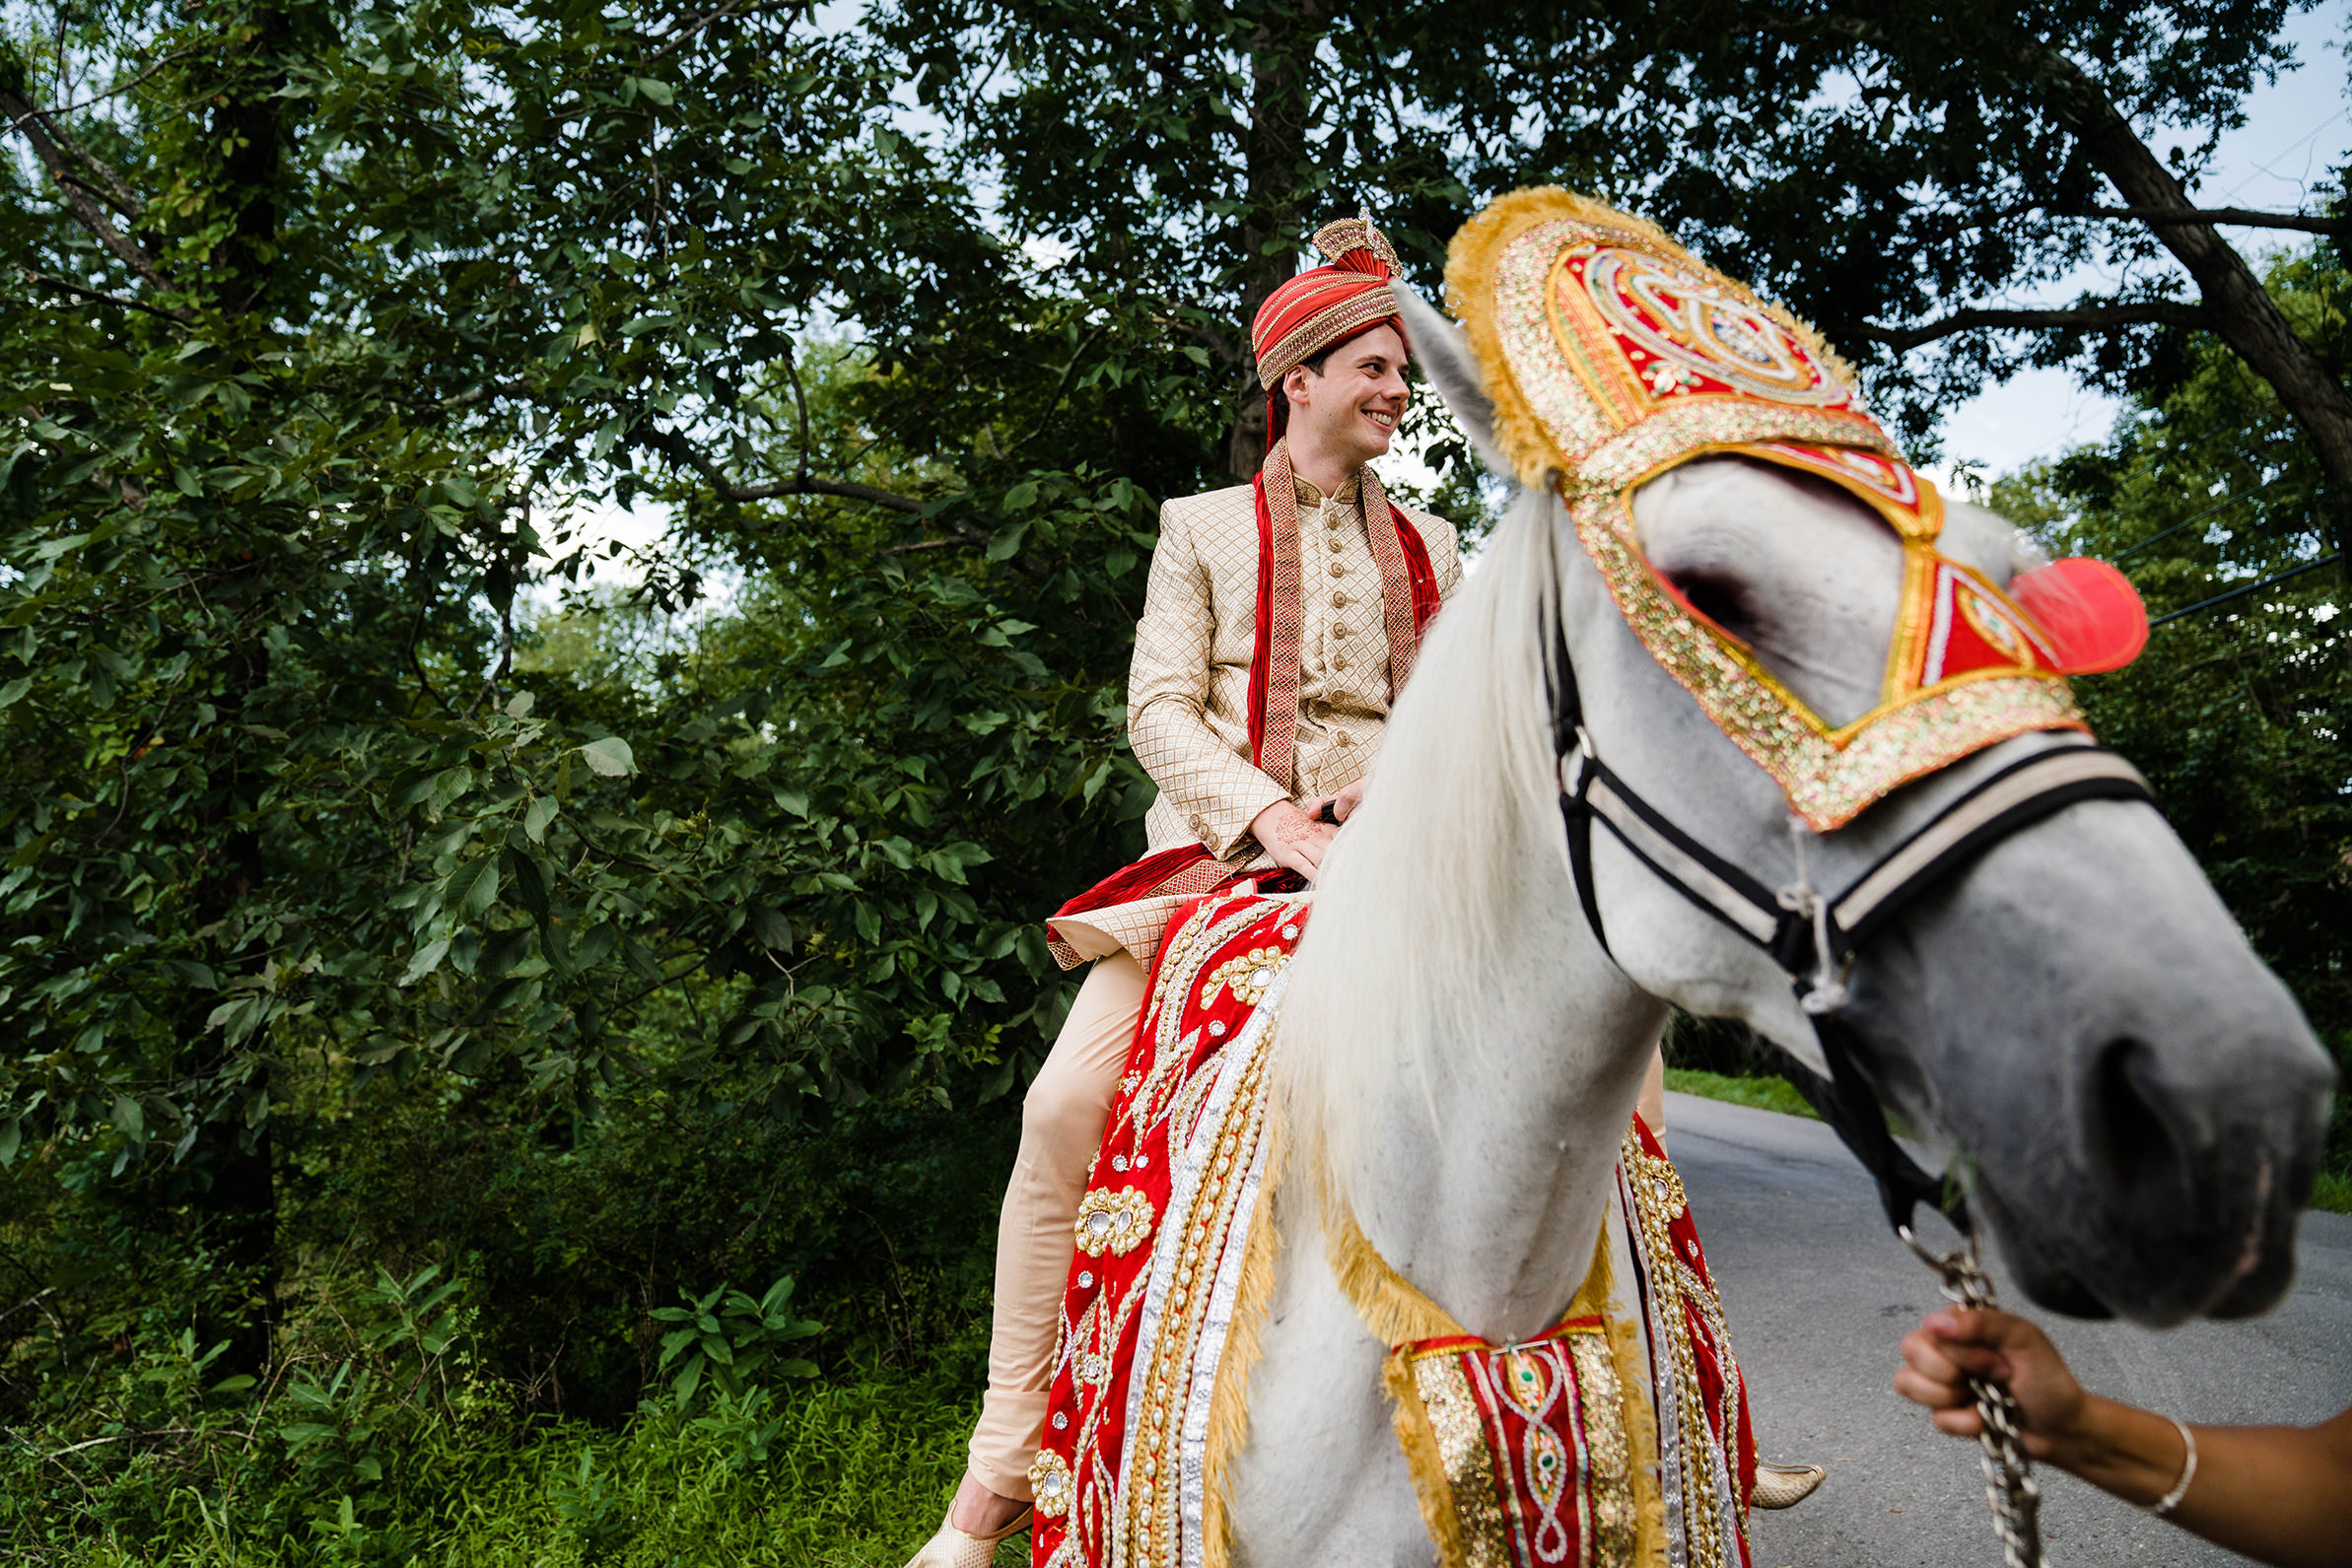 A documentary photograph featured in the best of wedding photography of 2019 showing the groom on a horse during the baraat 